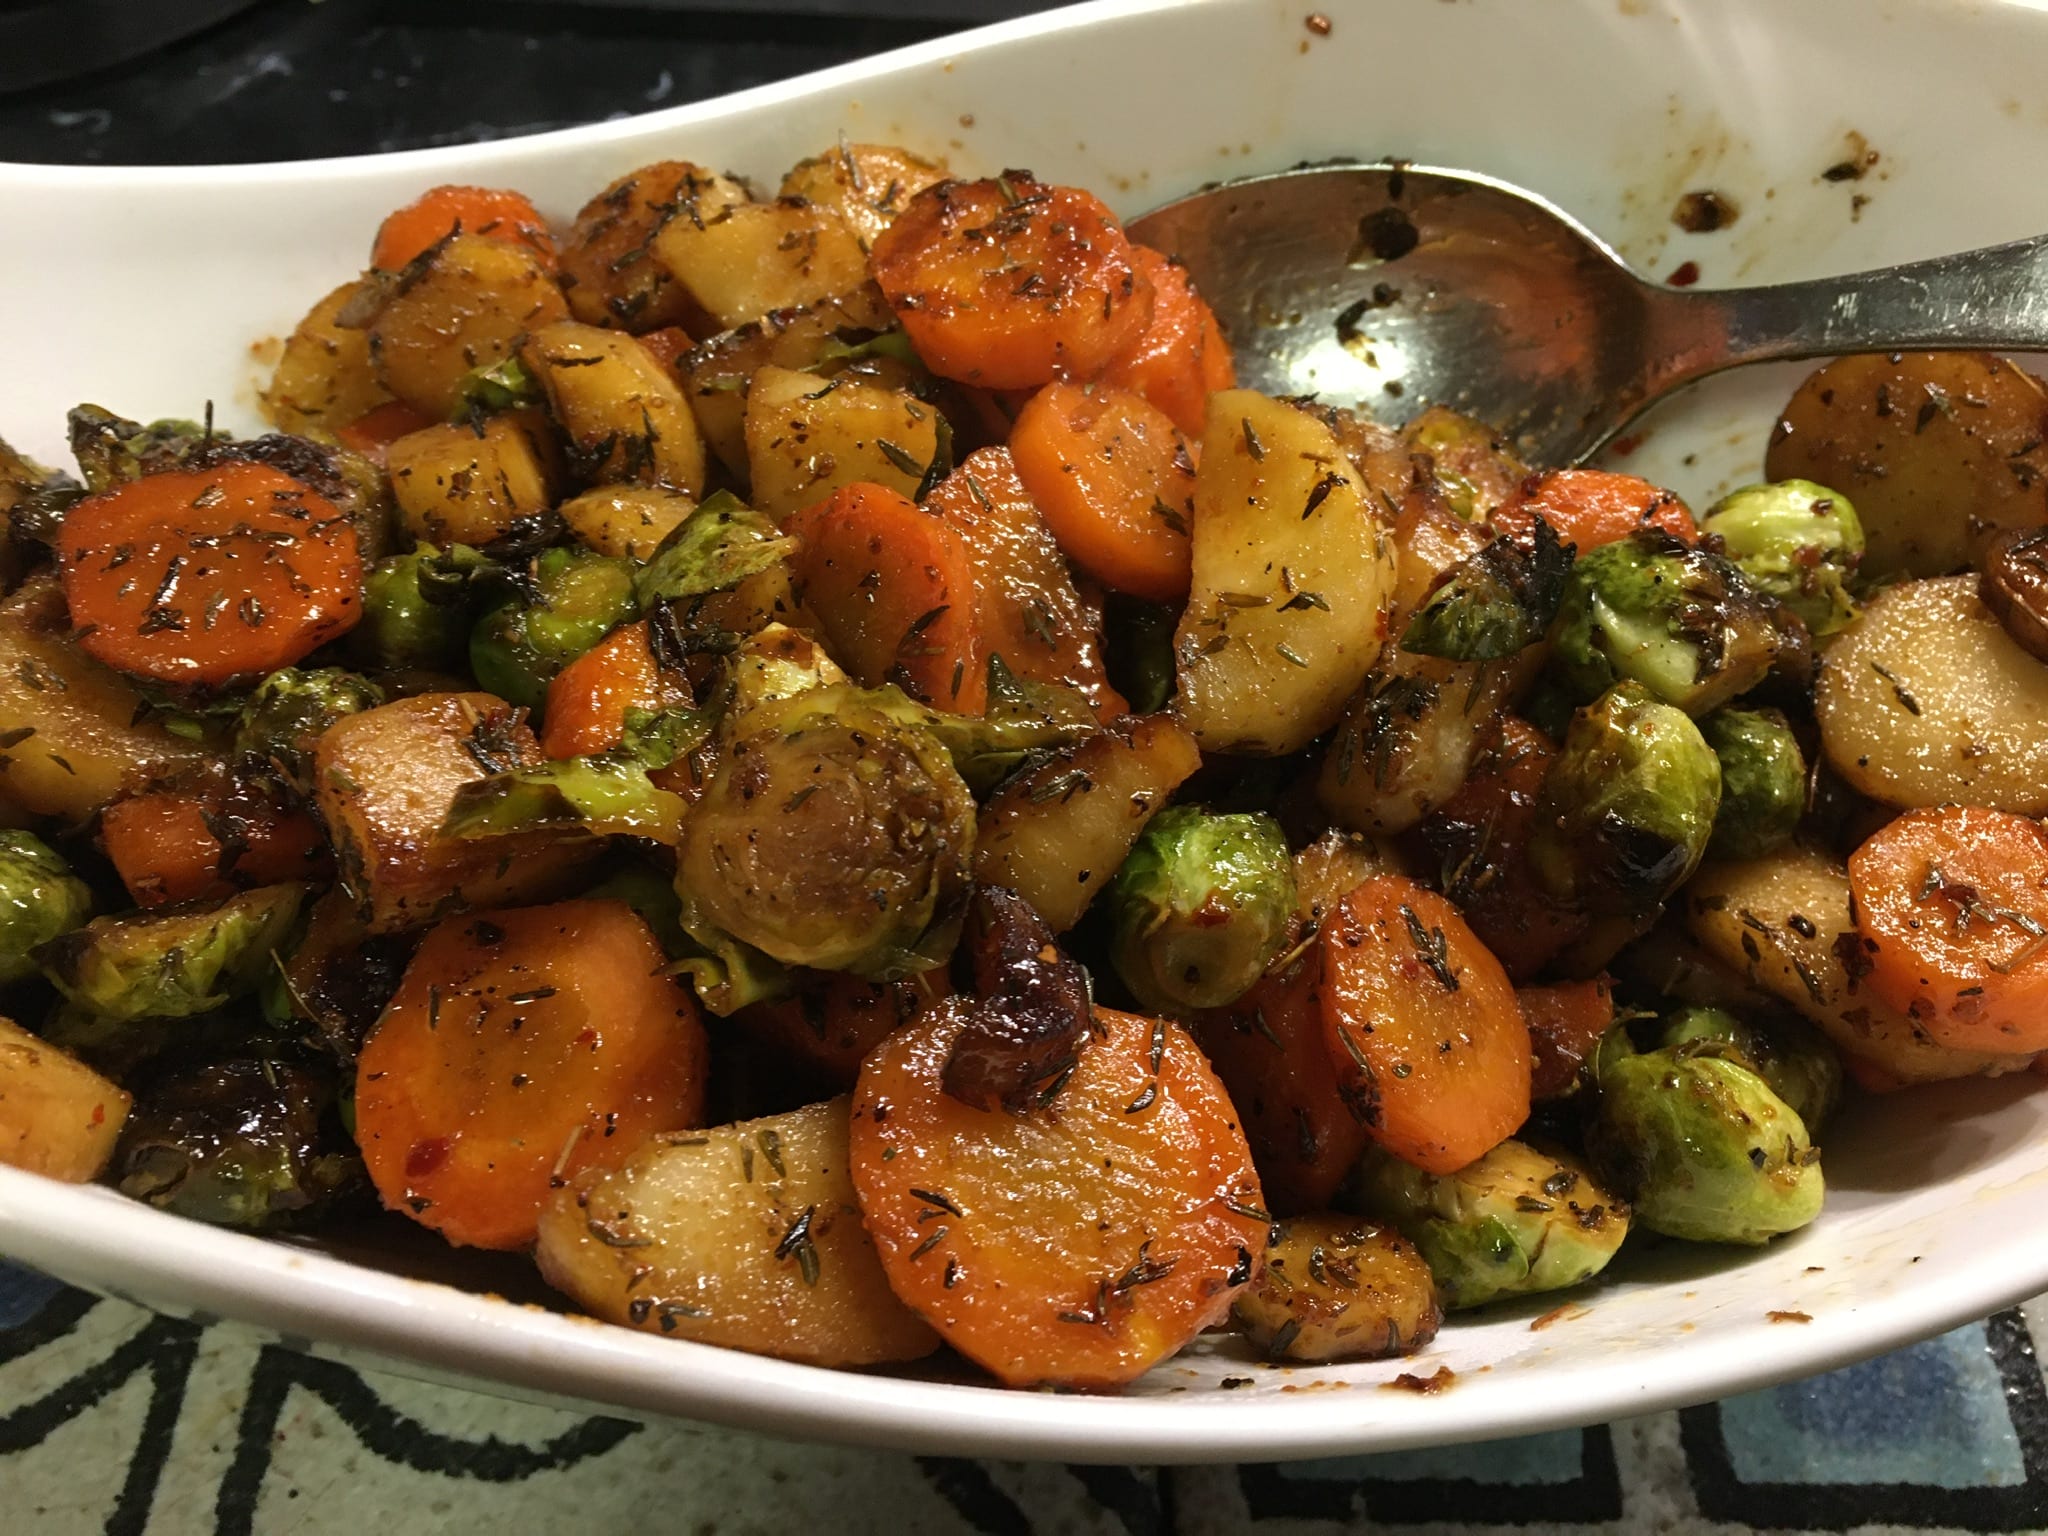 Sautéed Brussels Carrots and Parsnips in Ponzu